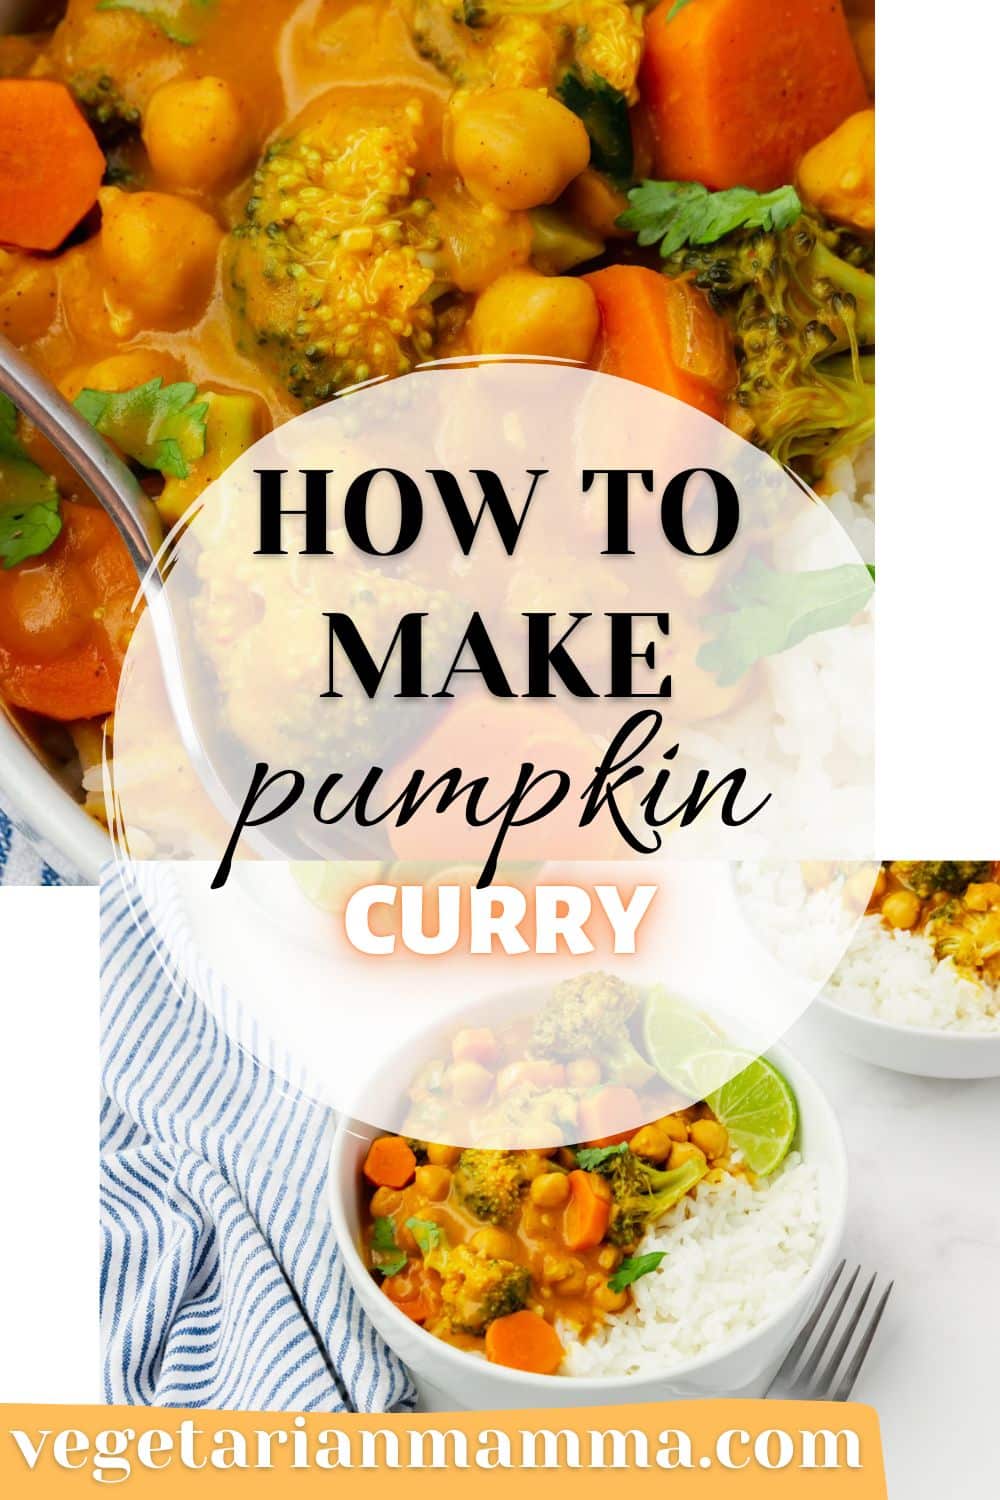 Vegan and gluten-free Pumpkin Curry is a simple and satisfying meal filled with healthy vegetables, and beans, blended with warm spices and creamy coconut milk. Make the whole meal in one pot, and get ready for compliments from your family!